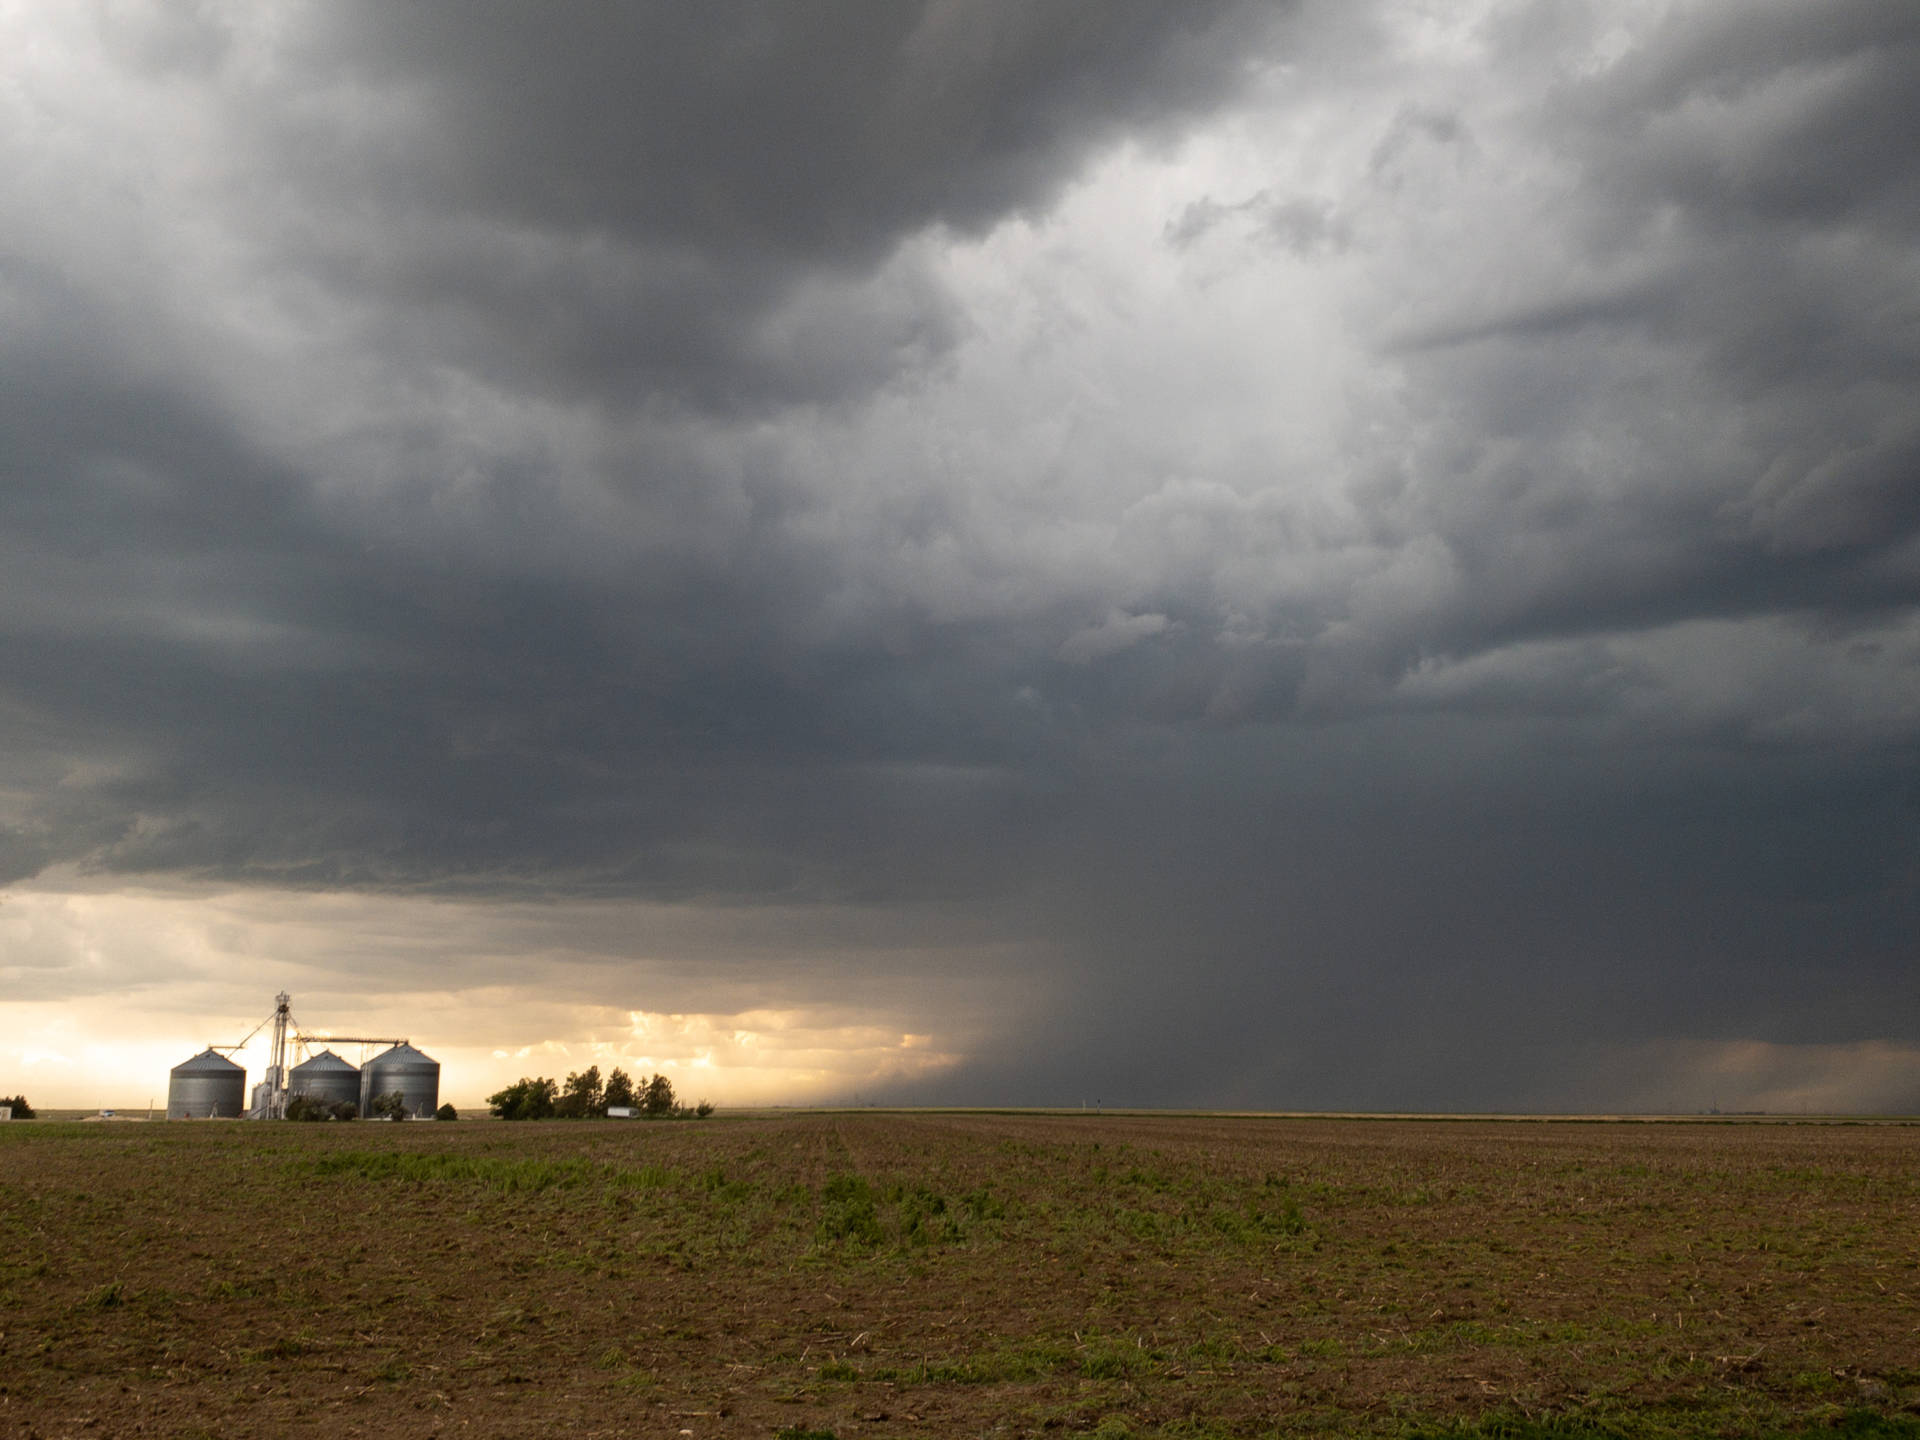 Strong storm between Leoti and Tribune, KS with rain foot and blowing dust.